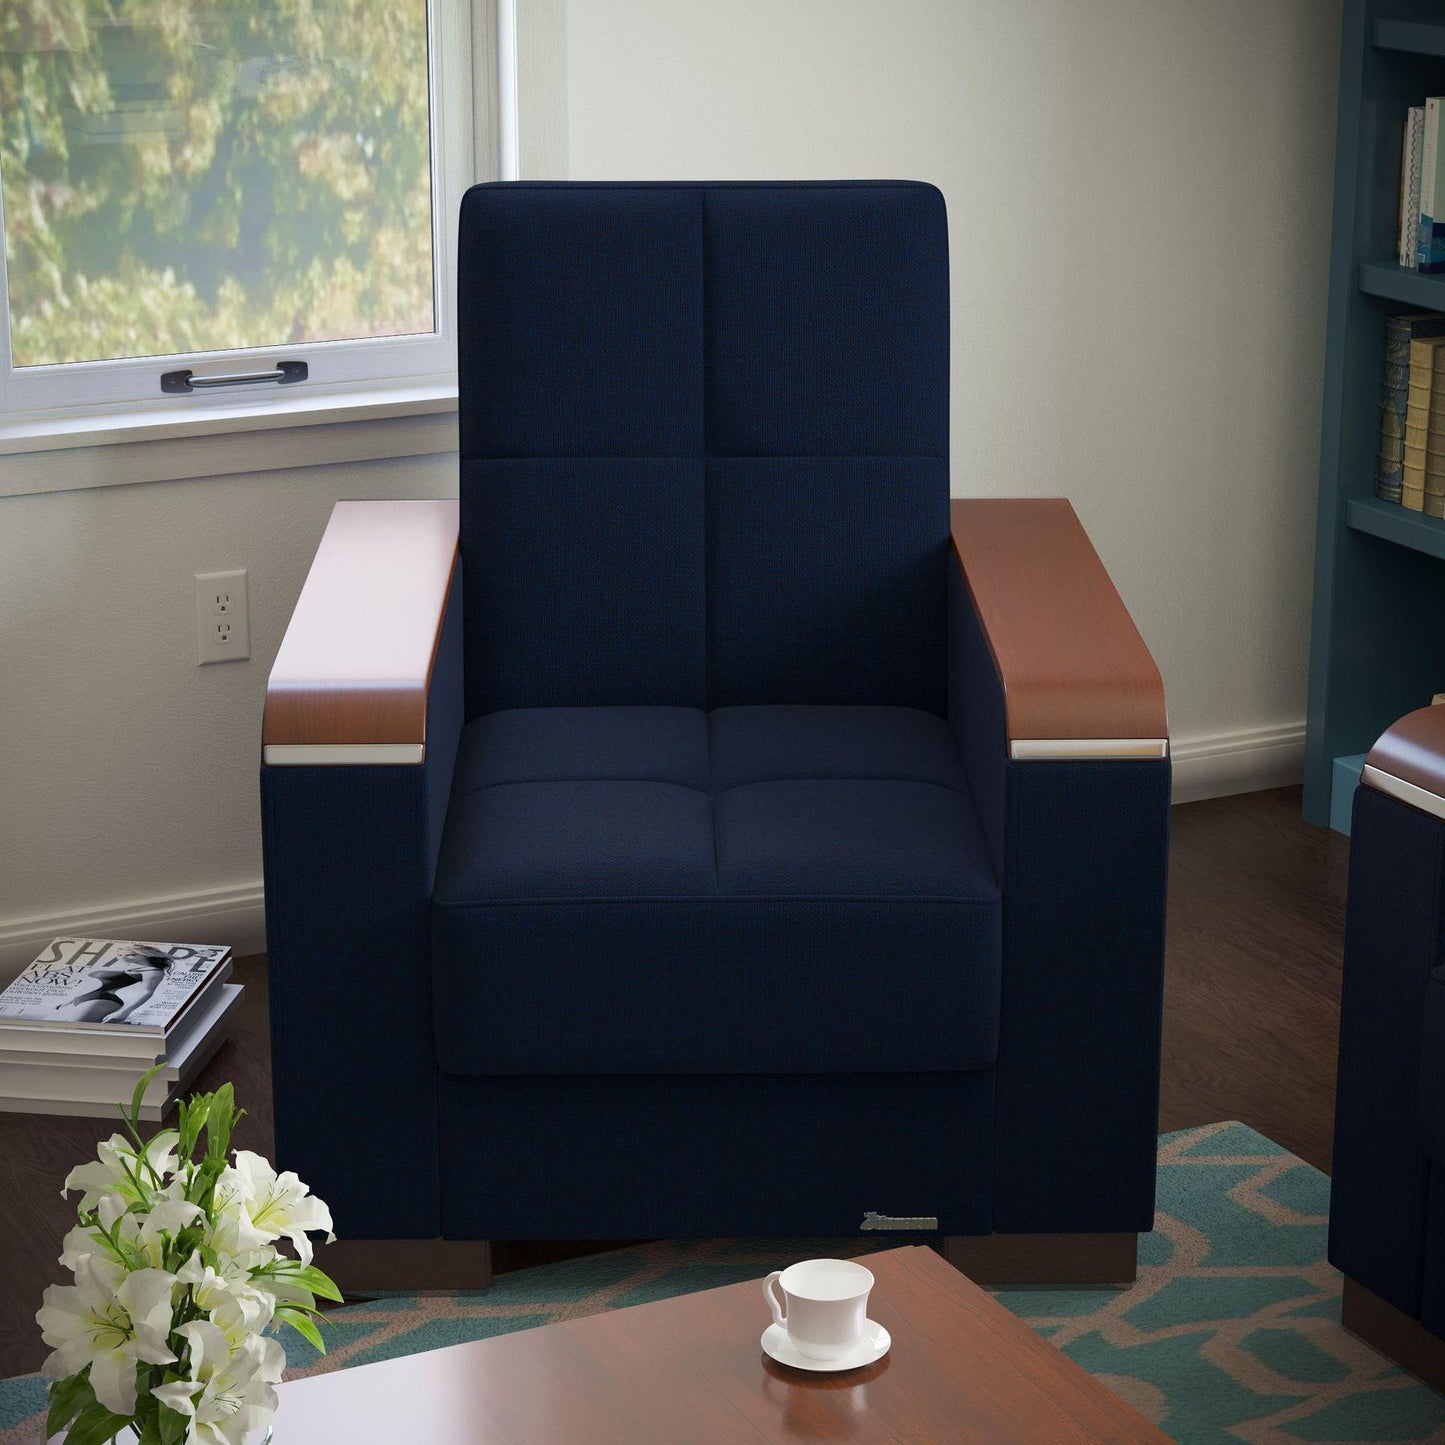 Modern design, Black Blue Denim , Chenille upholstered convertible Armchair with underseat storage from Voyage Luxe by Ottomanson in living room lifestyle setting by itself. This Armchair measures 38 inches width by 36 inches depth by 41 inches height.